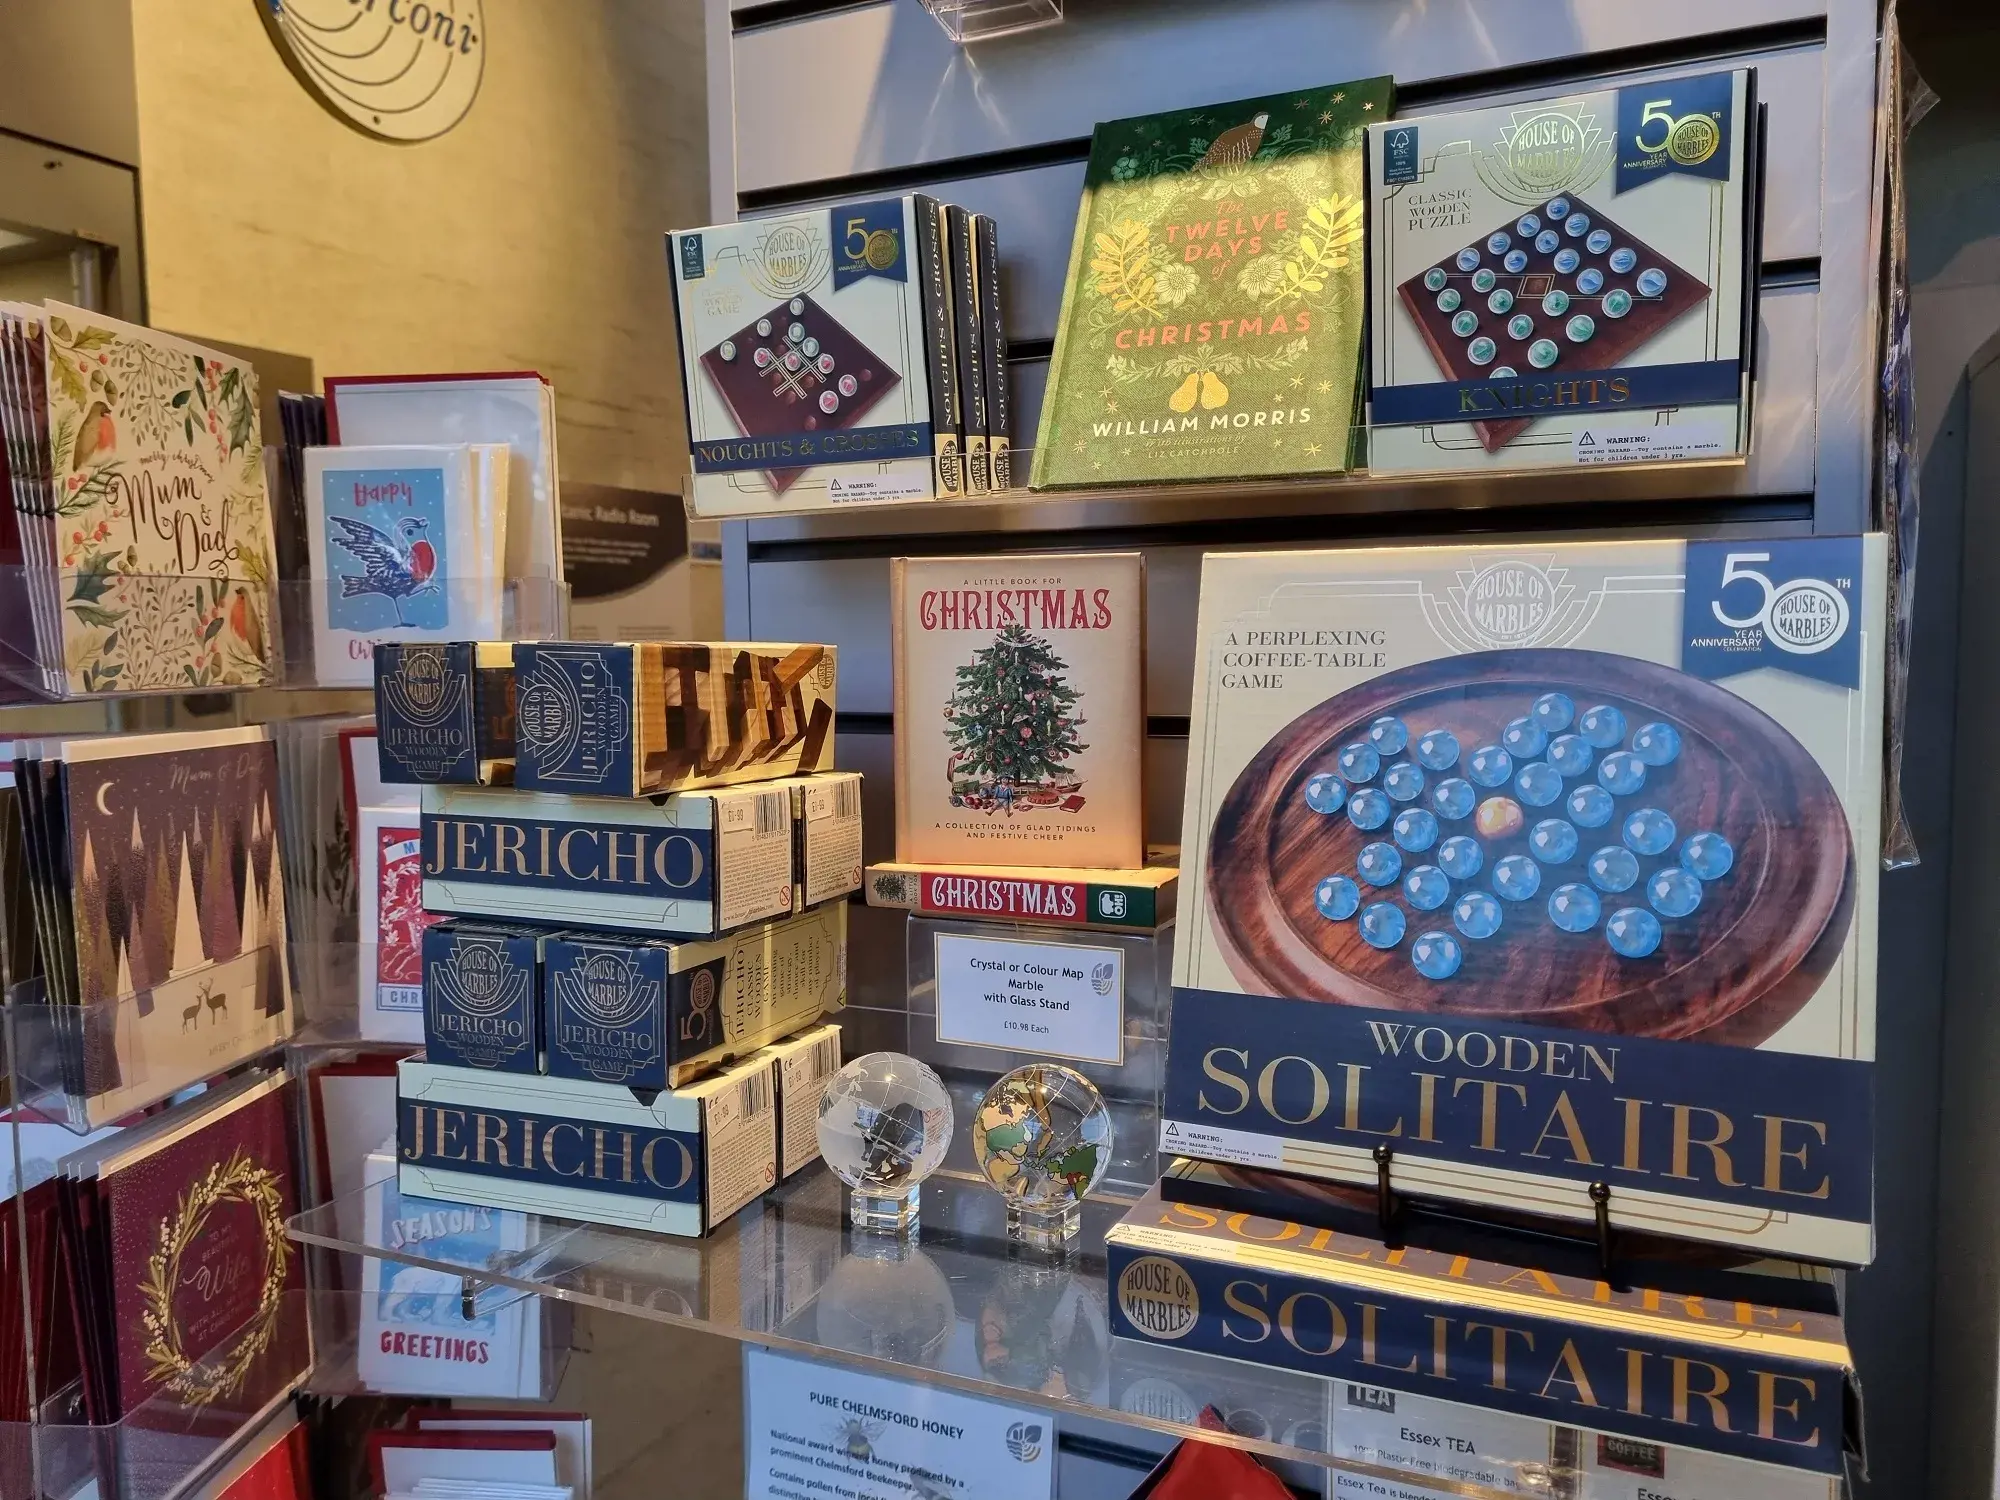 Mixed wooden board games